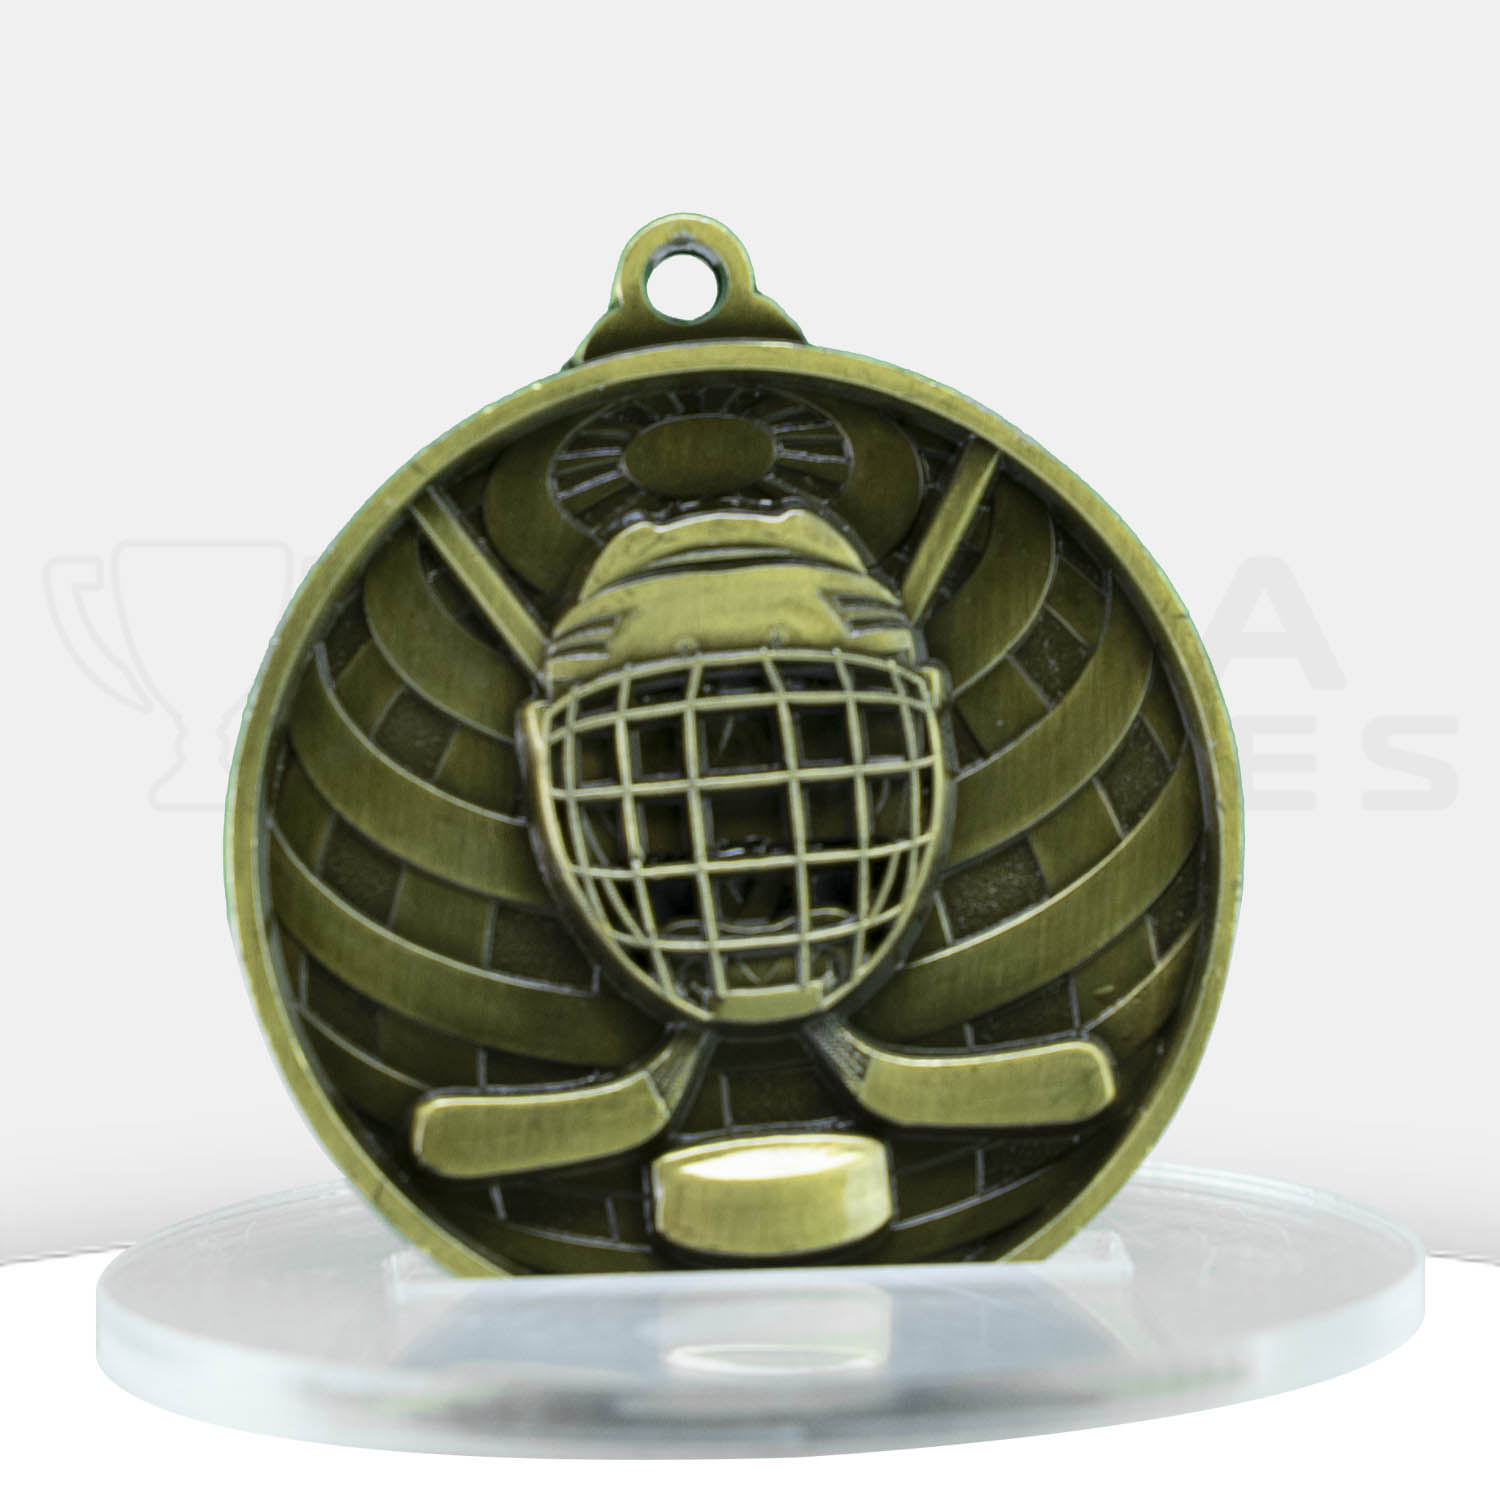 global-medal-ice-hockey-gold-front